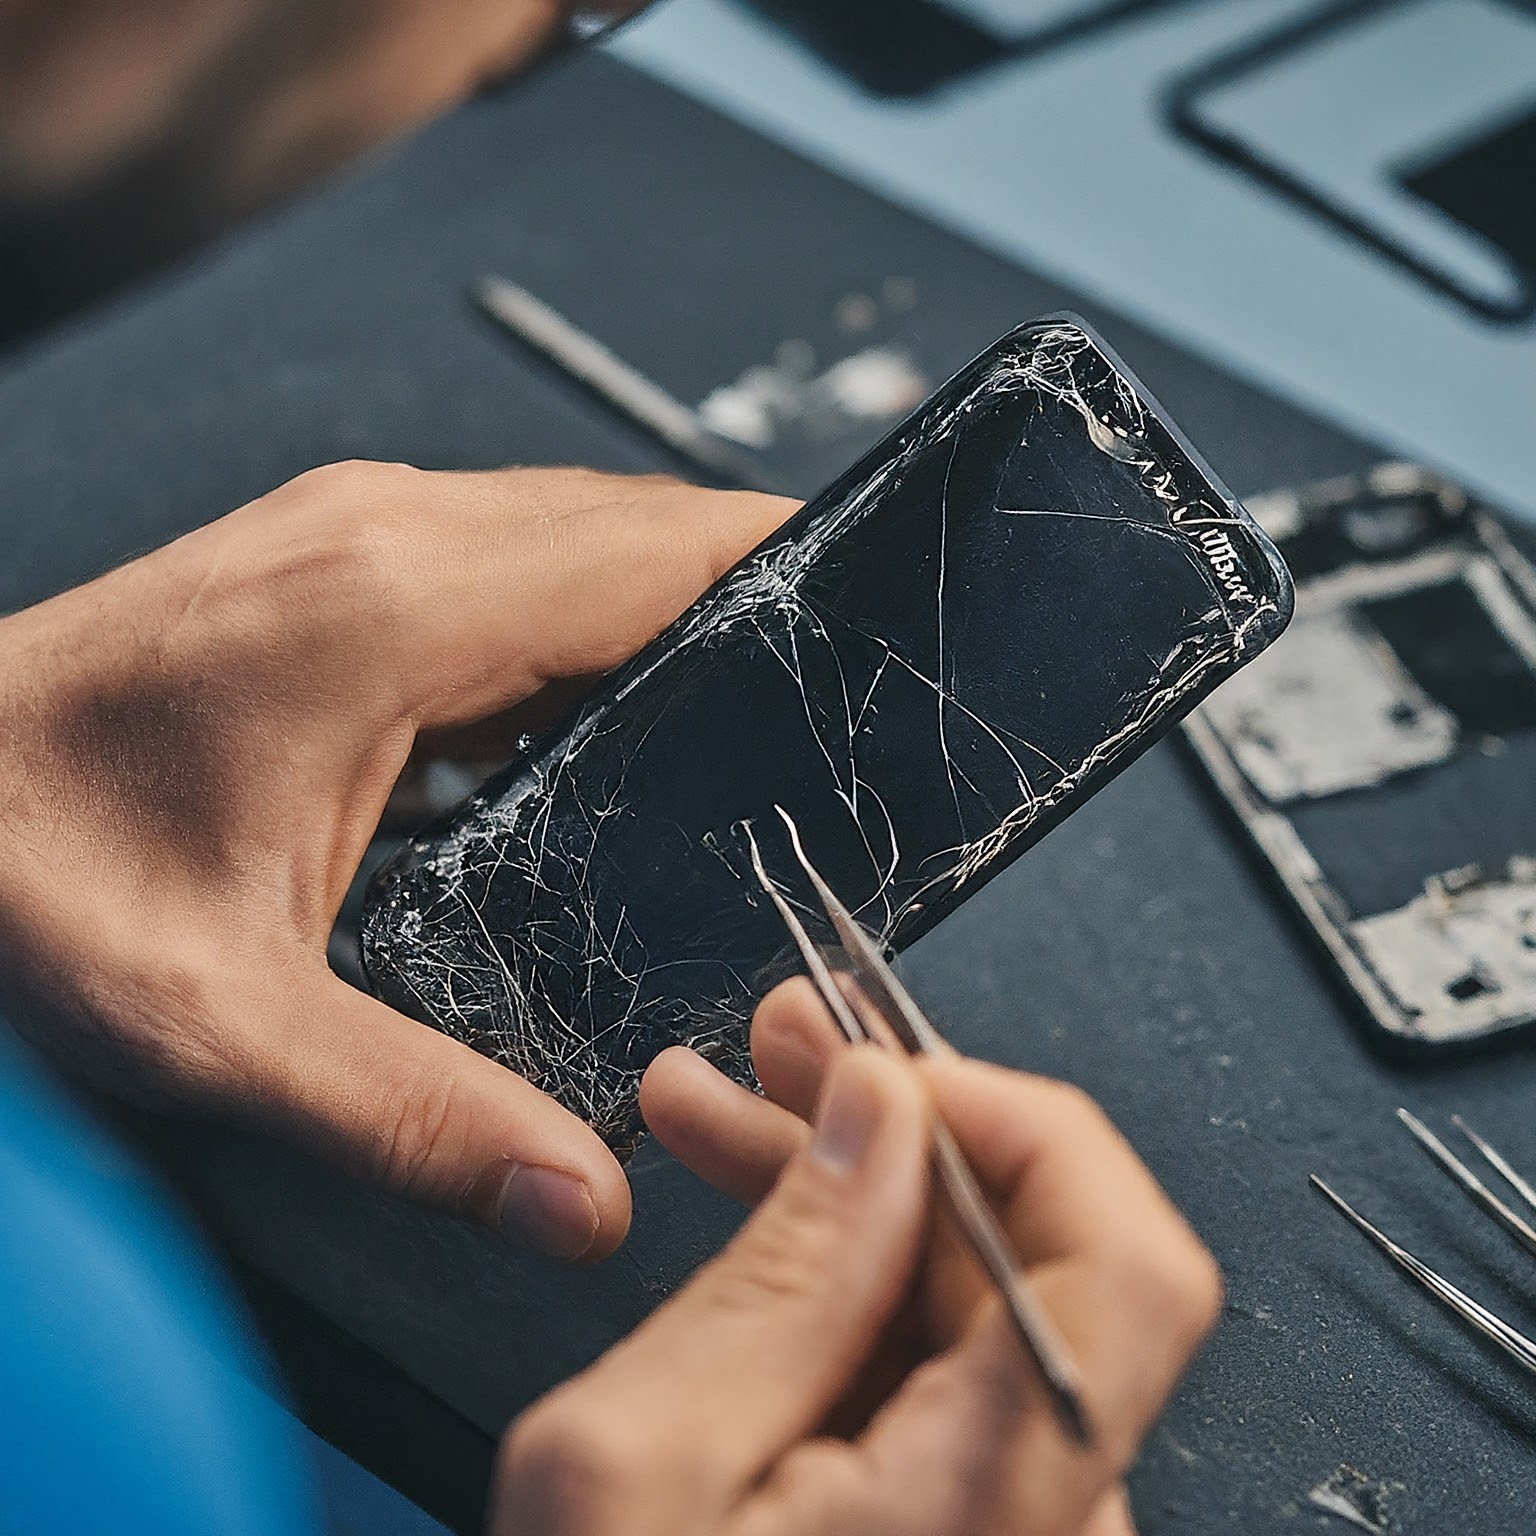 ## FastFixCell: Your Local Shrewsbury Fix for Cracked Screens & More! **(732) 380-7858 | Text: (732) 800-1110 | 1175 Broad St., Shrewsbury, NJ** Need a lightning-fast fix for your broken phone? Look no further than FastFixCell in Shrewsbury, NJ! Whether you've got a shattered screen, a wonky battery, or any other tech trouble, our expert technicians are here to get you back up and running in no time. **Why Choose FastFixCell?** * **Fastest Fixes in Town:** We offer **same-day service** for most repairs, so you won't be without your phone for long. * **Expert Technicians:** Our team is **highly trained and certified** to fix all major phone brands and models. * **Affordable Prices:** We offer **competitive prices and transparent quotes**, so you know exactly what you're paying for. * **Free Diagnostics:** We'll diagnose your phone's issue for **free**, so you know what needs to be fixed. * **Quality Parts:** We use only the **highest quality parts** to ensure a long-lasting repair. * **Convenient Location:** We're located in the heart of Shrewsbury, near **[list nearby landmarks]** for easy access. **What We Repair:** * **Broken Screens:** We can fix cracked, shattered, or unresponsive screens for all major phone brands. * **Charging Issues:** Whether your phone won't charge at all or charges slowly, we can diagnose and fix the problem. * **Battery Replacements:** Is your battery draining quickly? We can replace your battery with a new, genuine one. * **Water Damage:** We can attempt to recover data and repair phones that have been exposed to water. * **Speaker & Microphone Issues:** We can fix muffled speakers, quiet microphones, and other audio problems. * **Software Issues:** We can troubleshoot and fix software bugs and glitches. * **And More!** We offer a wide range of other repairs, so don't hesitate to ask! **Phone Brands We Service:** * Apple iPhone (all models) * Samsung Galaxy (all models) * Google Pixel (all models) * OnePlus (all models) * Motorola (all models) * LG (all models) * Sony Xperia (all models) * And more! **Additional Services:** * **Data Transfer:** We can transfer your data from your old phone to your new phone. * **Screen Protectors & Cases:** We sell a variety of screen protectors and cases to protect your phone from future damage. **Visit FastFixCell Today!** Don't let a broken phone slow you down! Visit FastFixCell at 1175 Broad St. in Shrewsbury, NJ, call us at (732) 380-7858, or text us at (732) 800-1110 to schedule a repair today! We're here to help you get back to connecting, capturing, and exploring with your phone in no time. **Remember to:** * **Update your Google My Business listing** with your updated phone number and text option. * **Add your business hours** to your Google My Business listing and website. * **Encourage customers to leave positive reviews online.** * **Run targeted ads on social media and Google** to reach potential customers in your area. By following these tips and providing exceptional service, FastFixCell can quickly become the go-to phone repair shop in Shrewsbury, NJ!